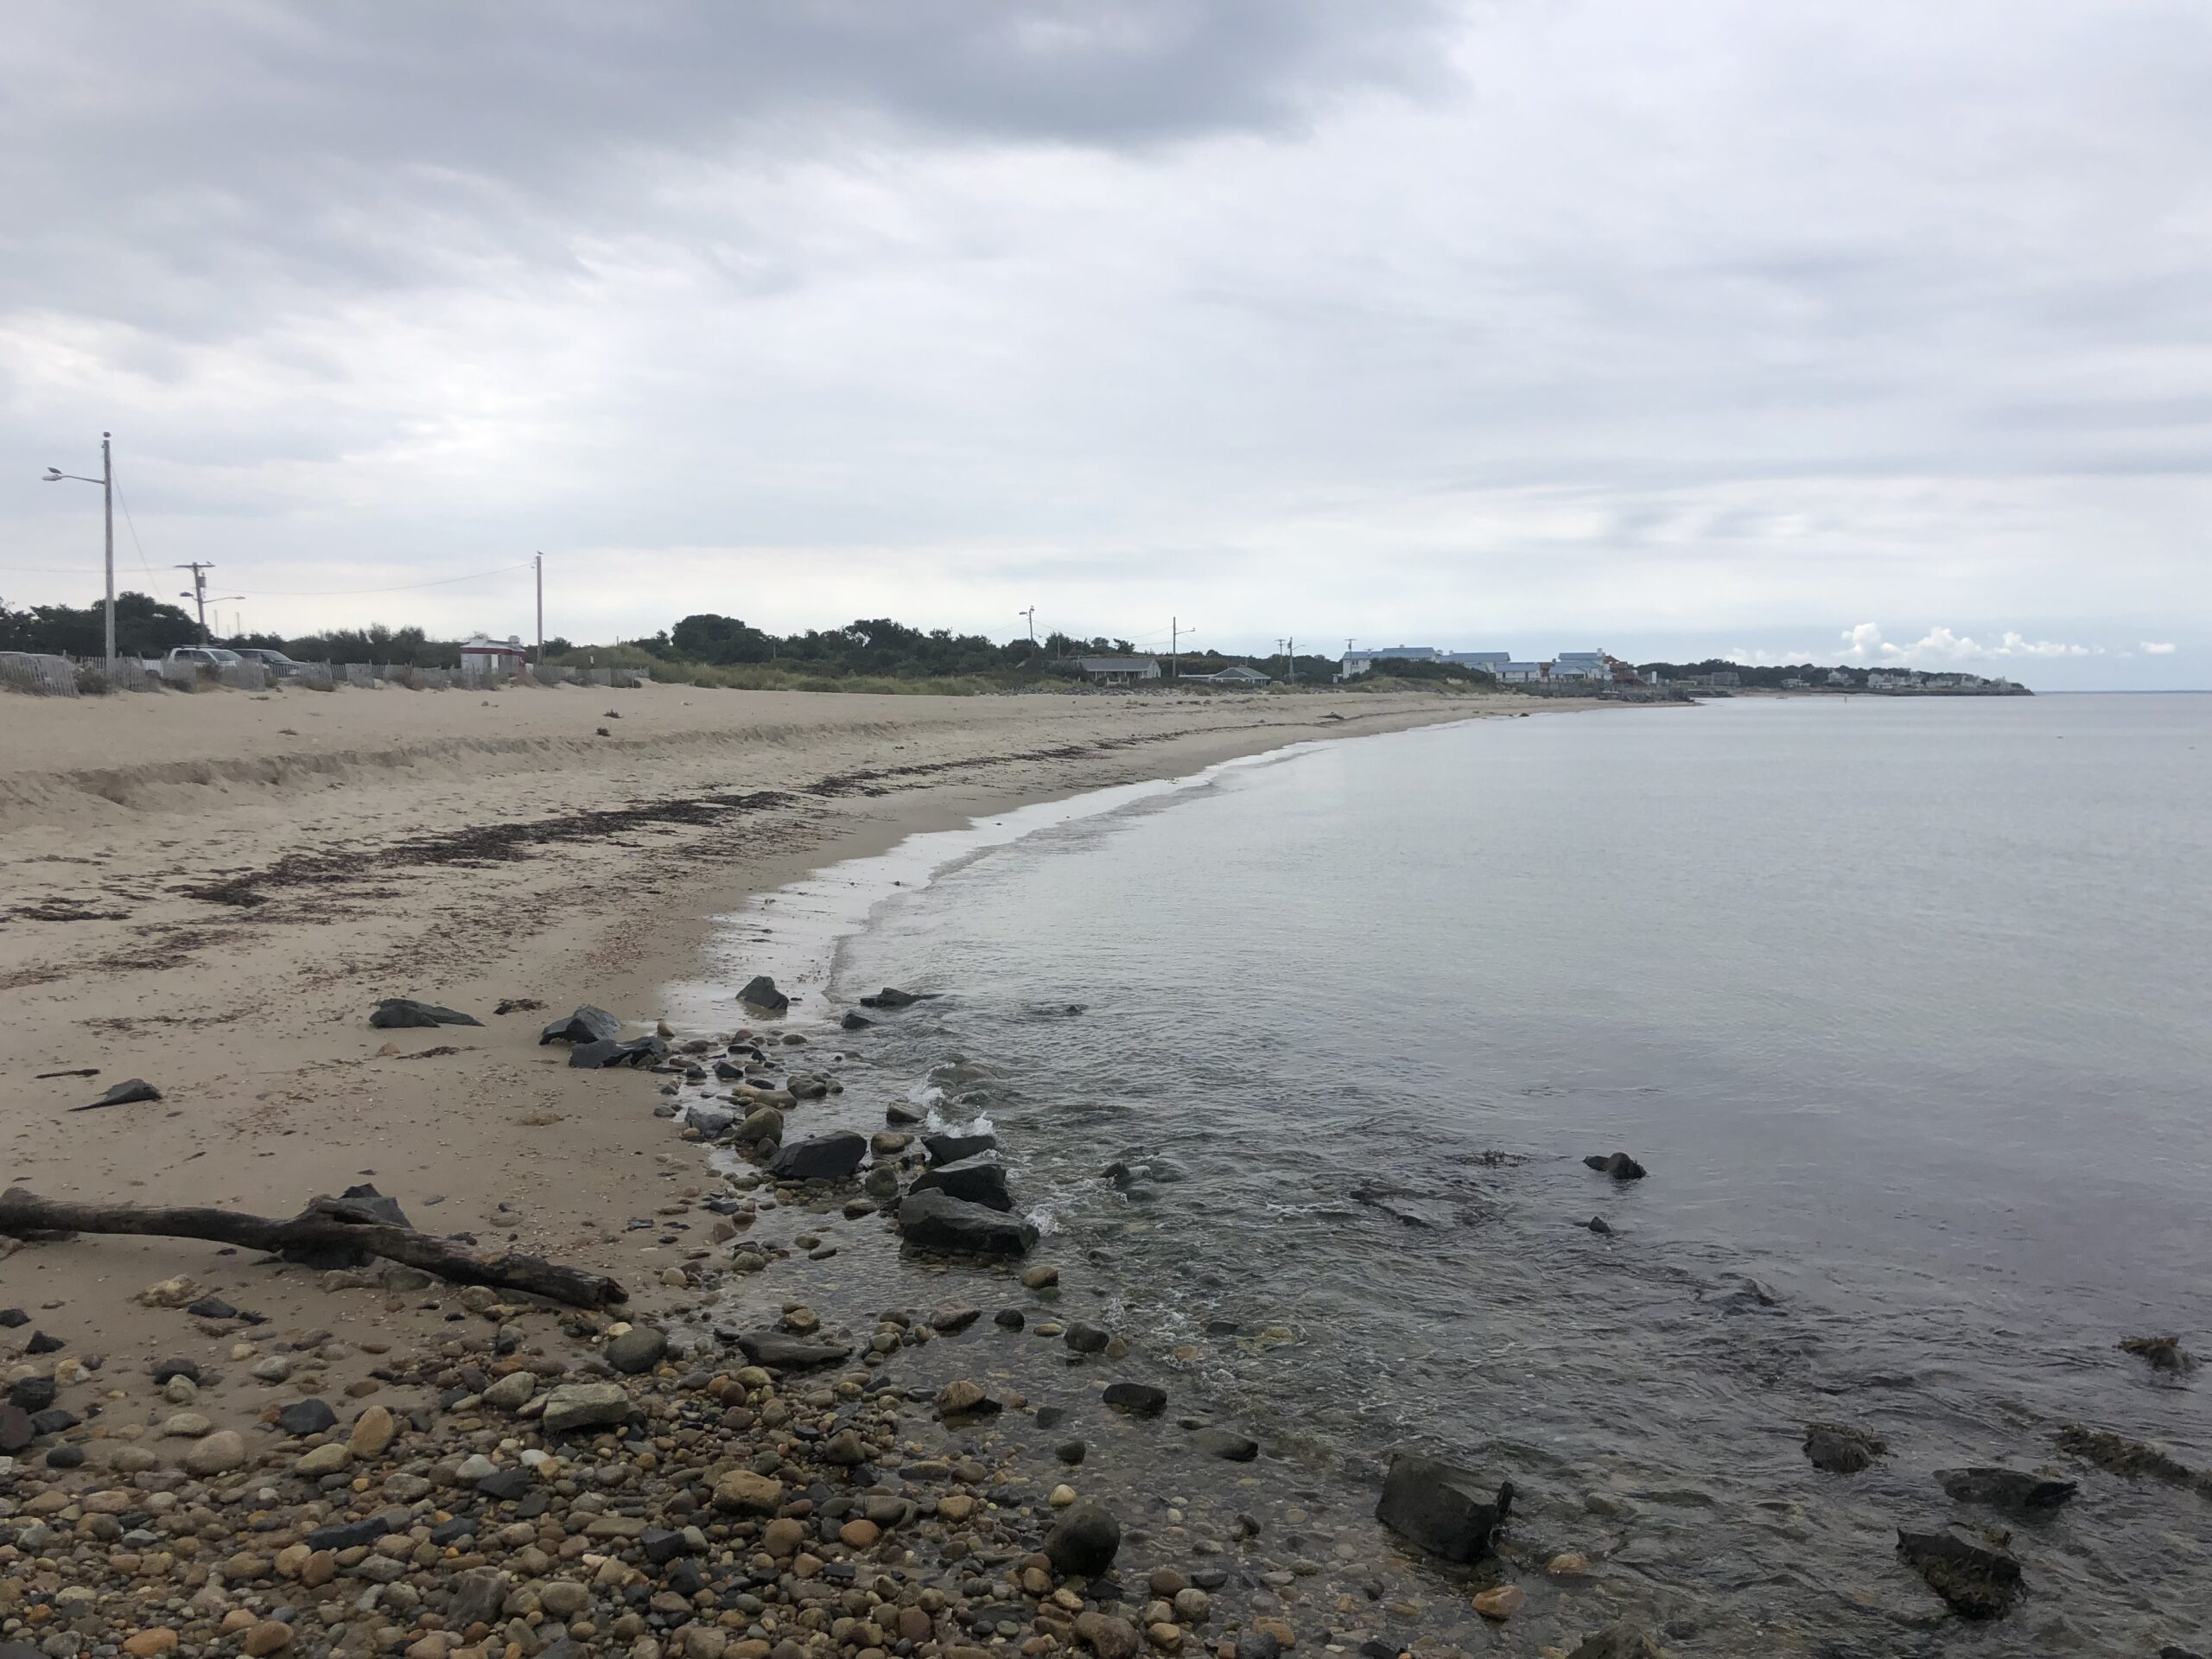 The beach to the west of Montauk Inlet will be rebuilt with sand dredged from the inlet channel, starting in October 2023.